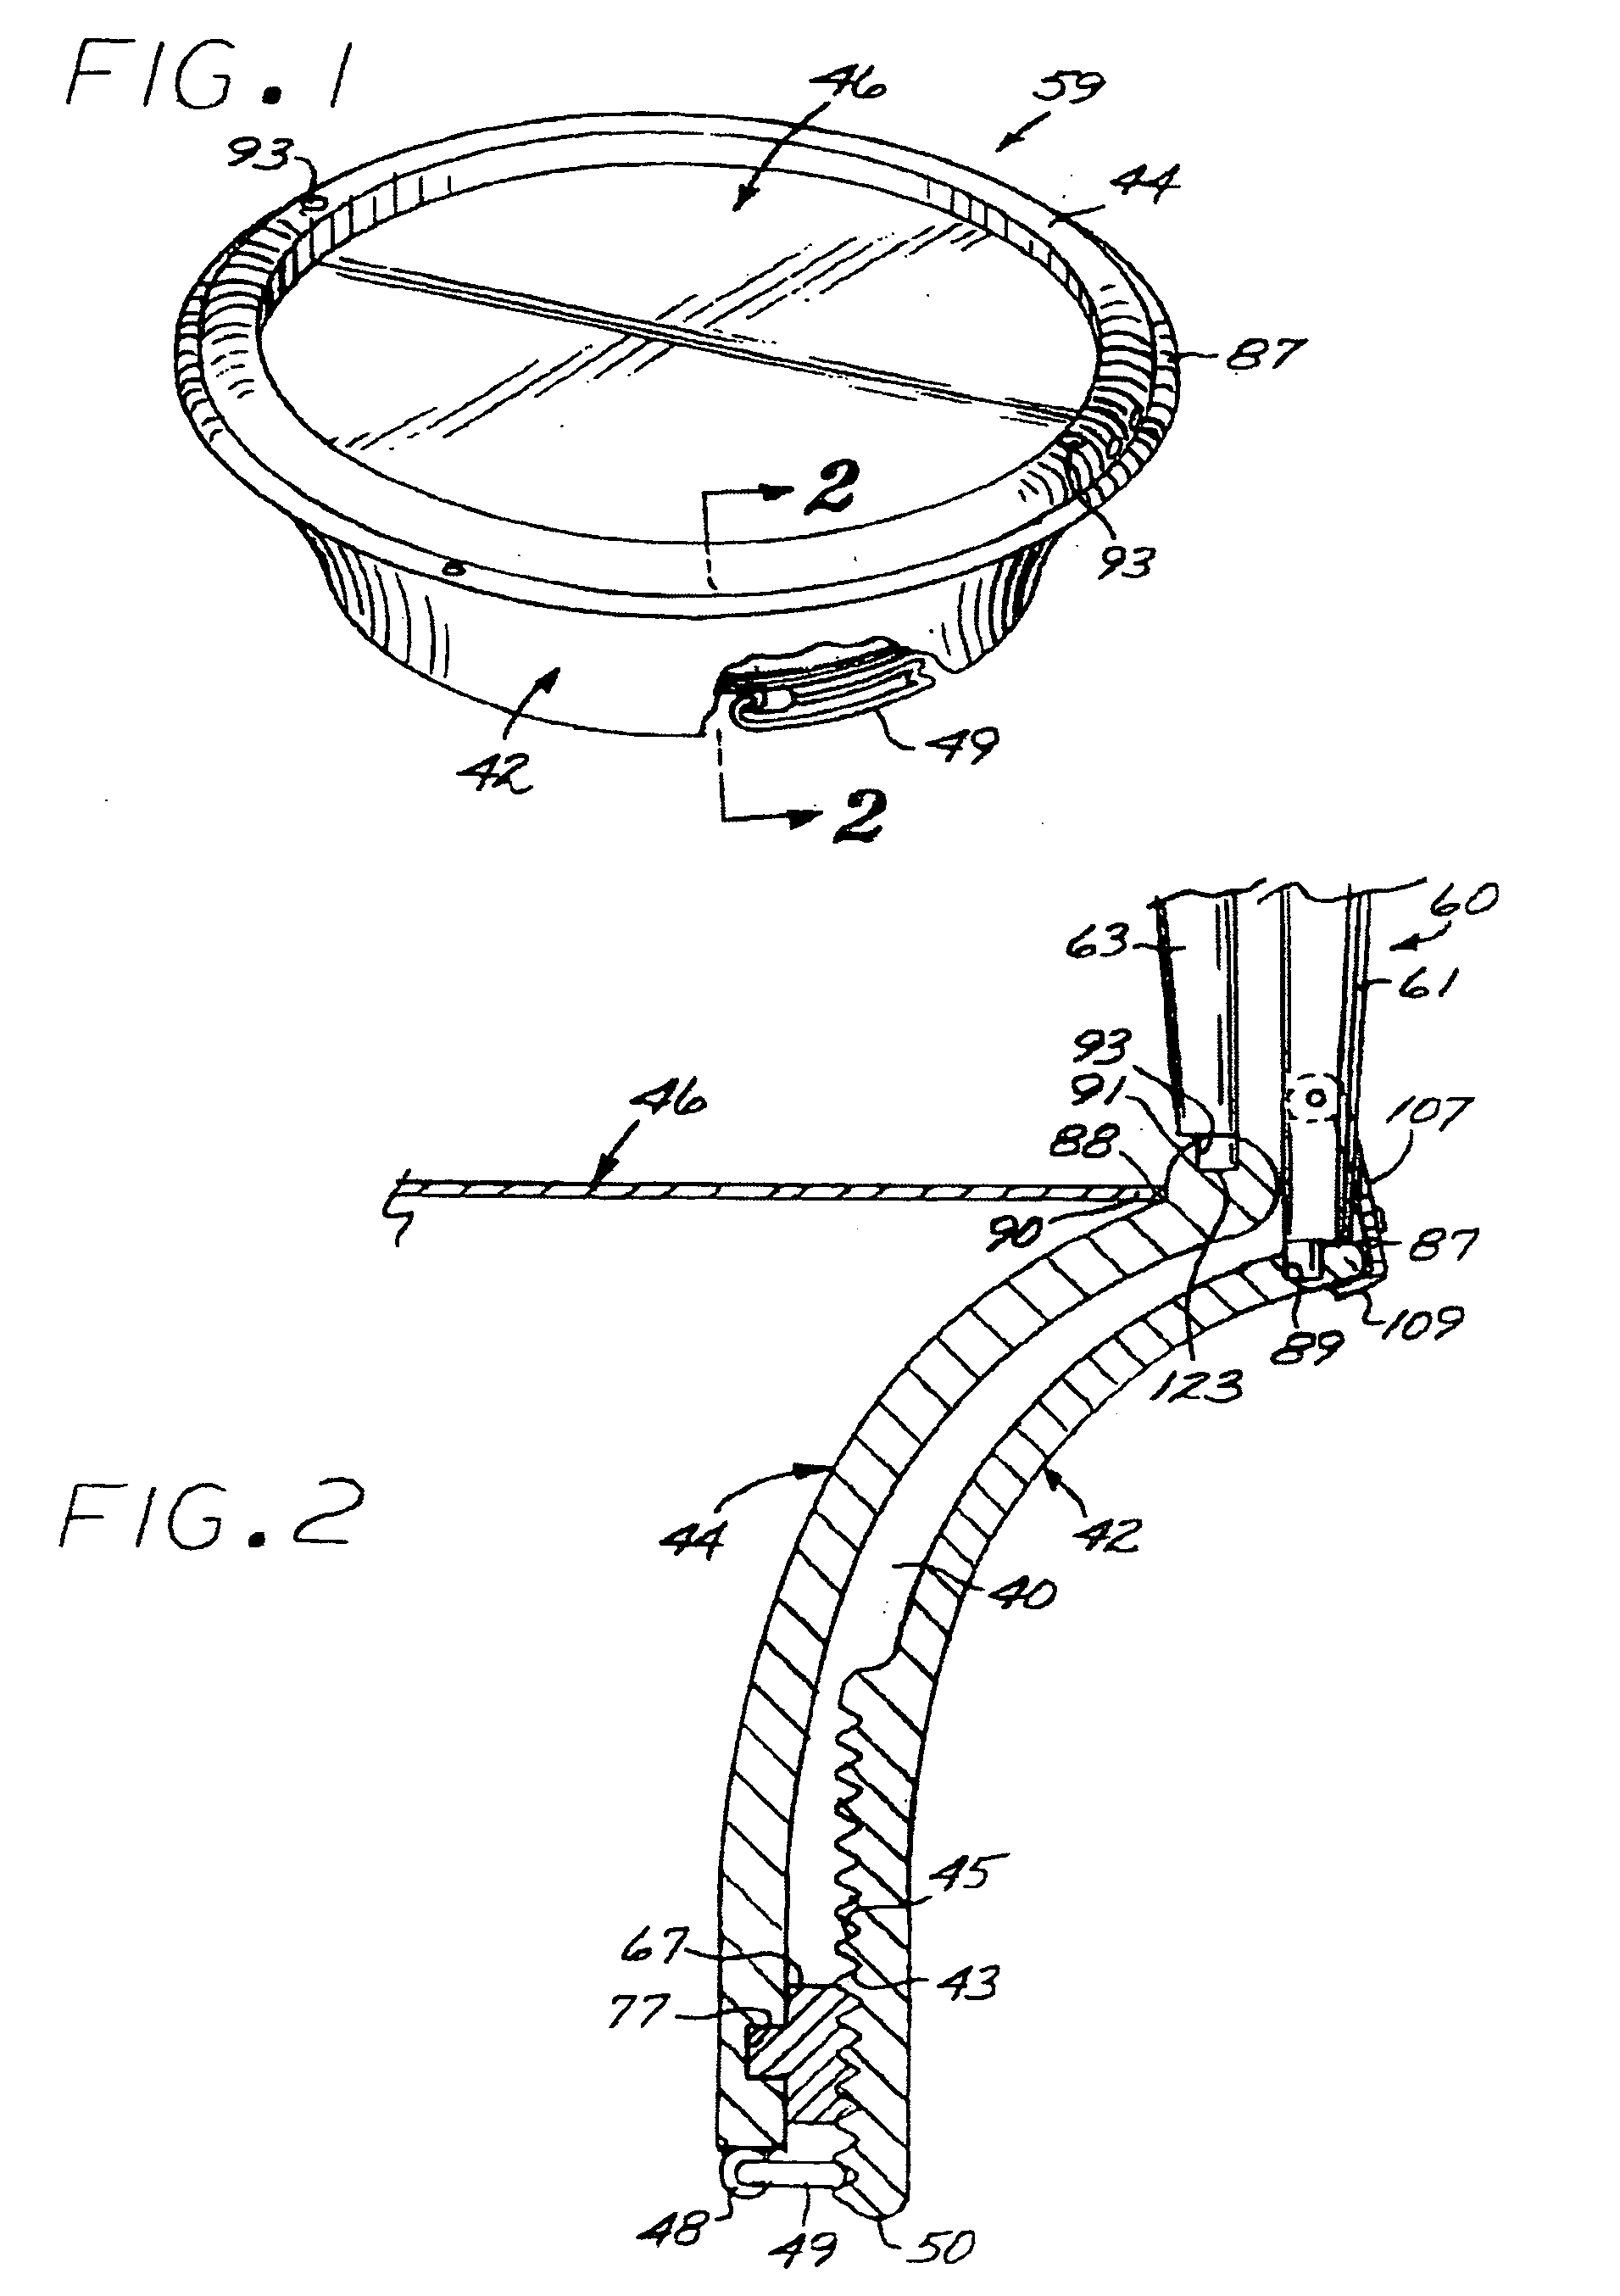 Heart valve annulus device and method of using same